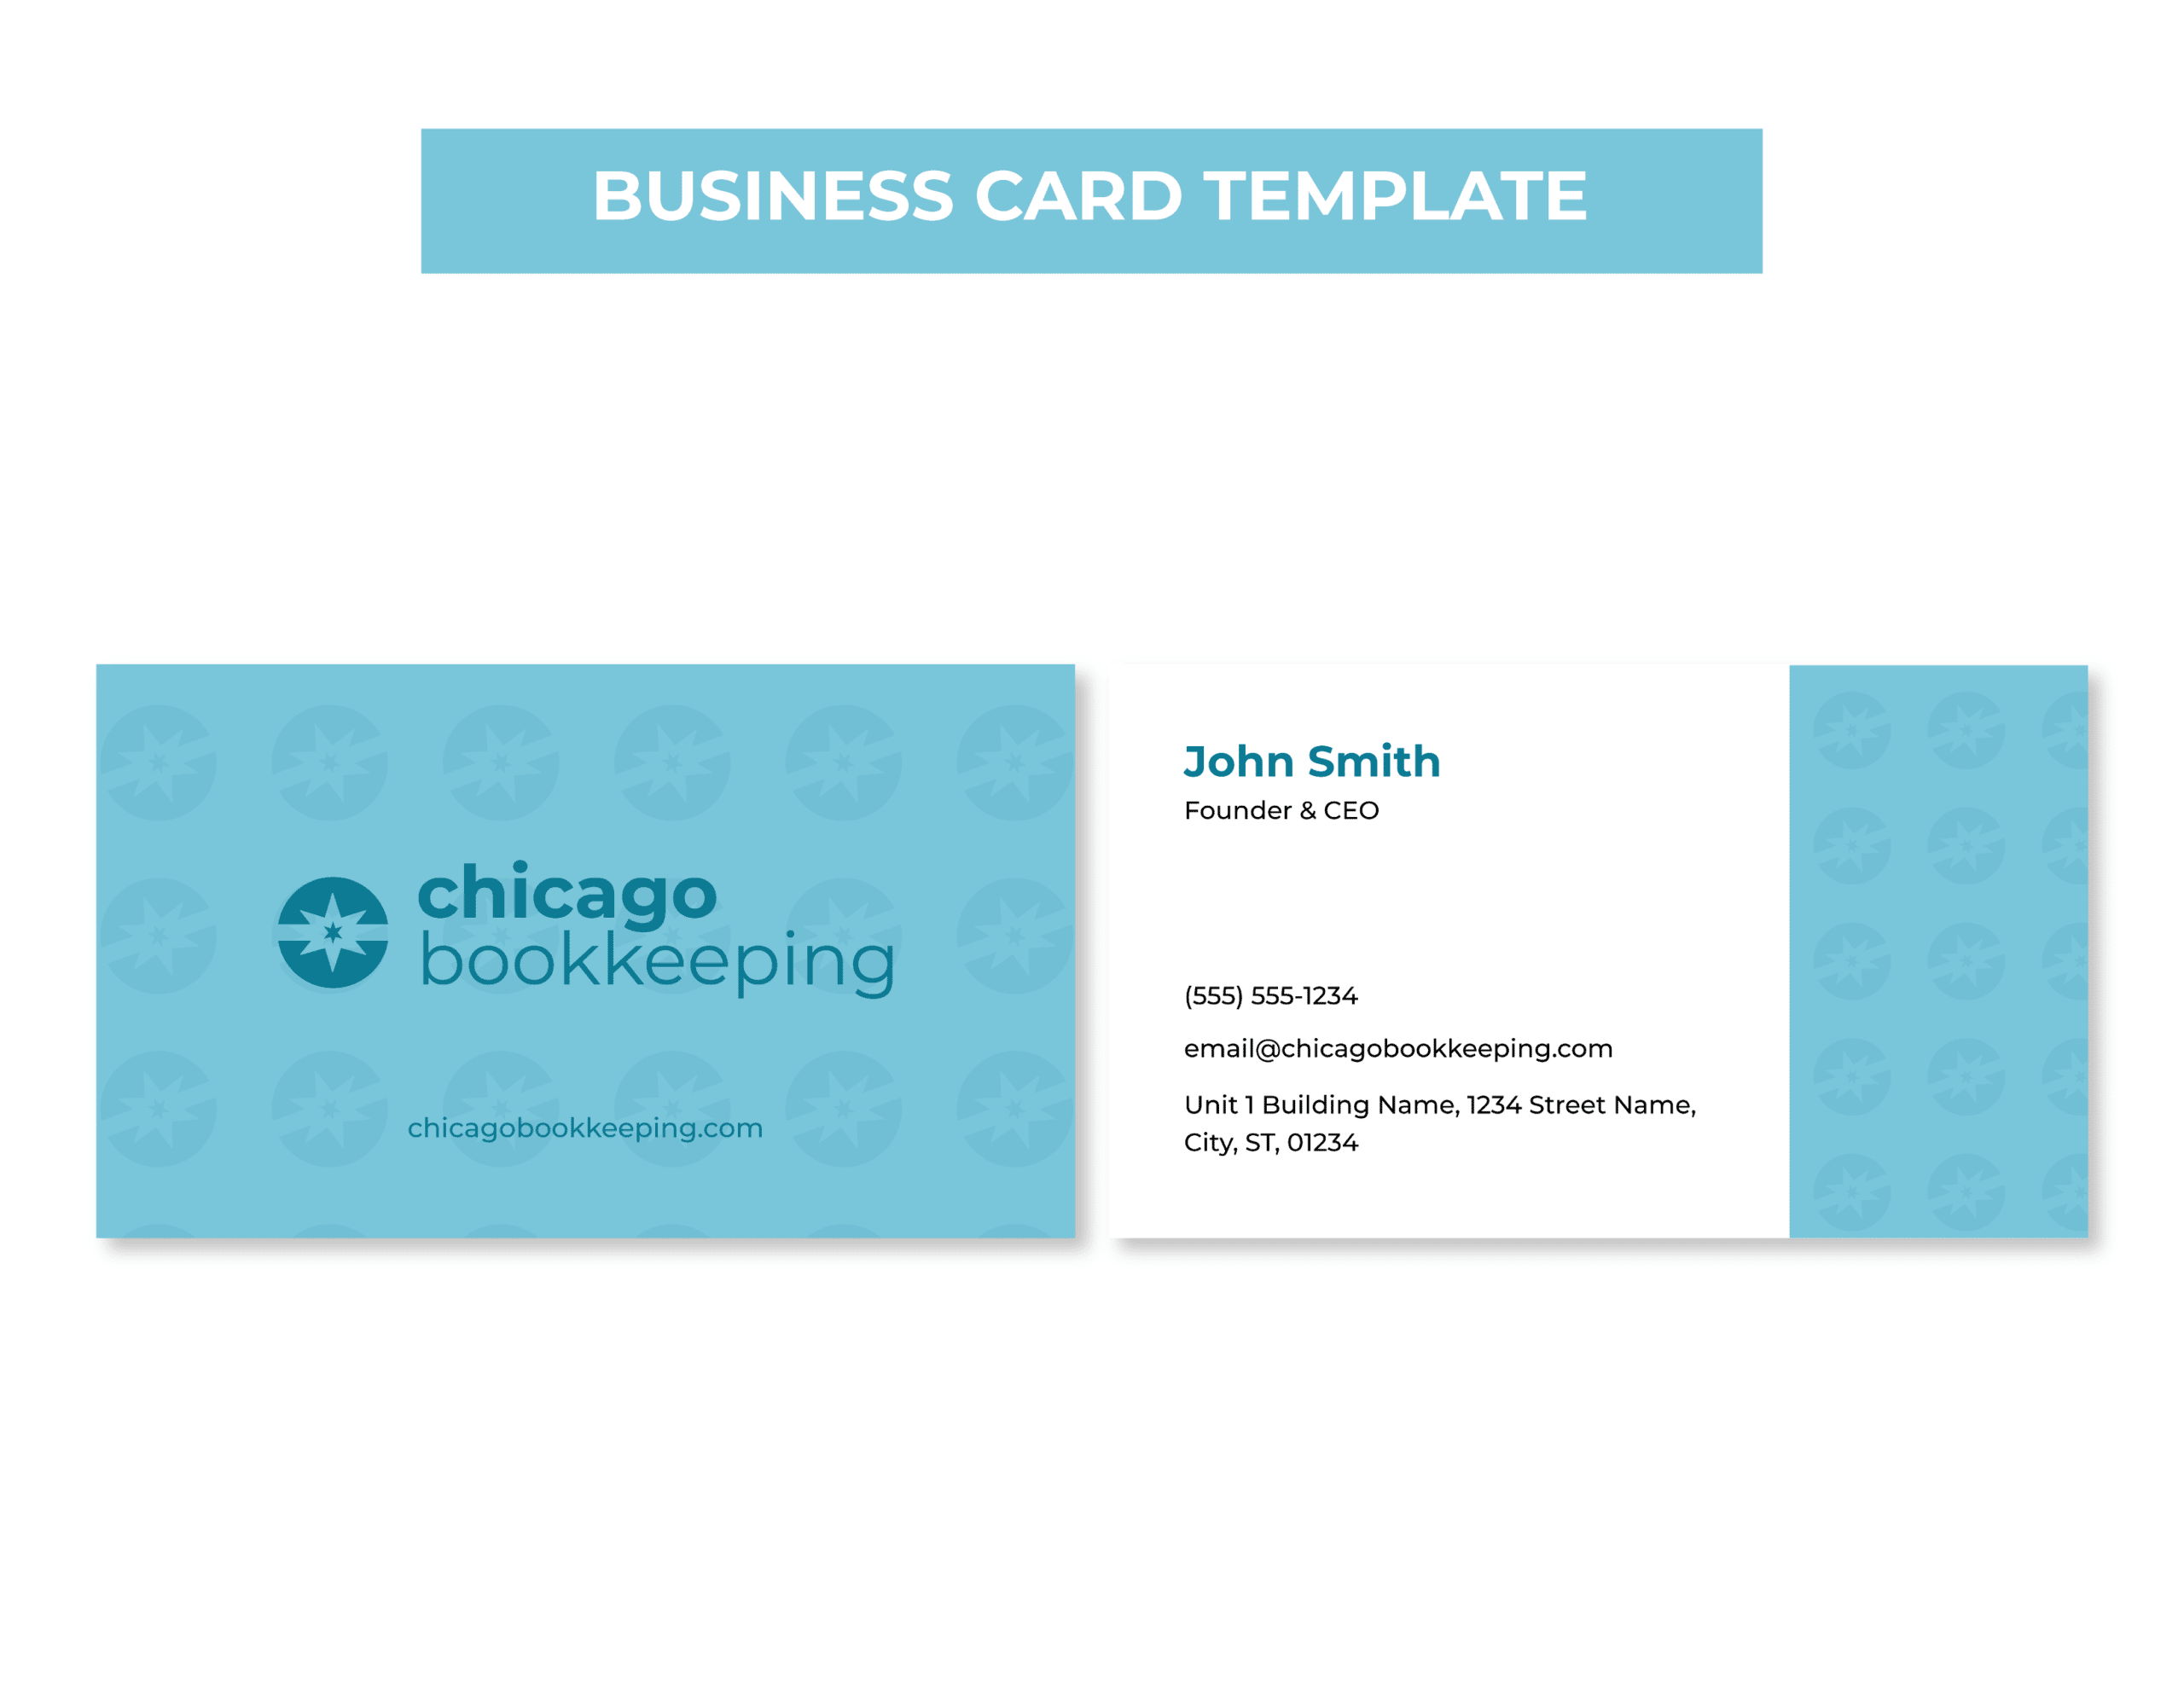 04Chicago_Bookkeeping__Business Card Template